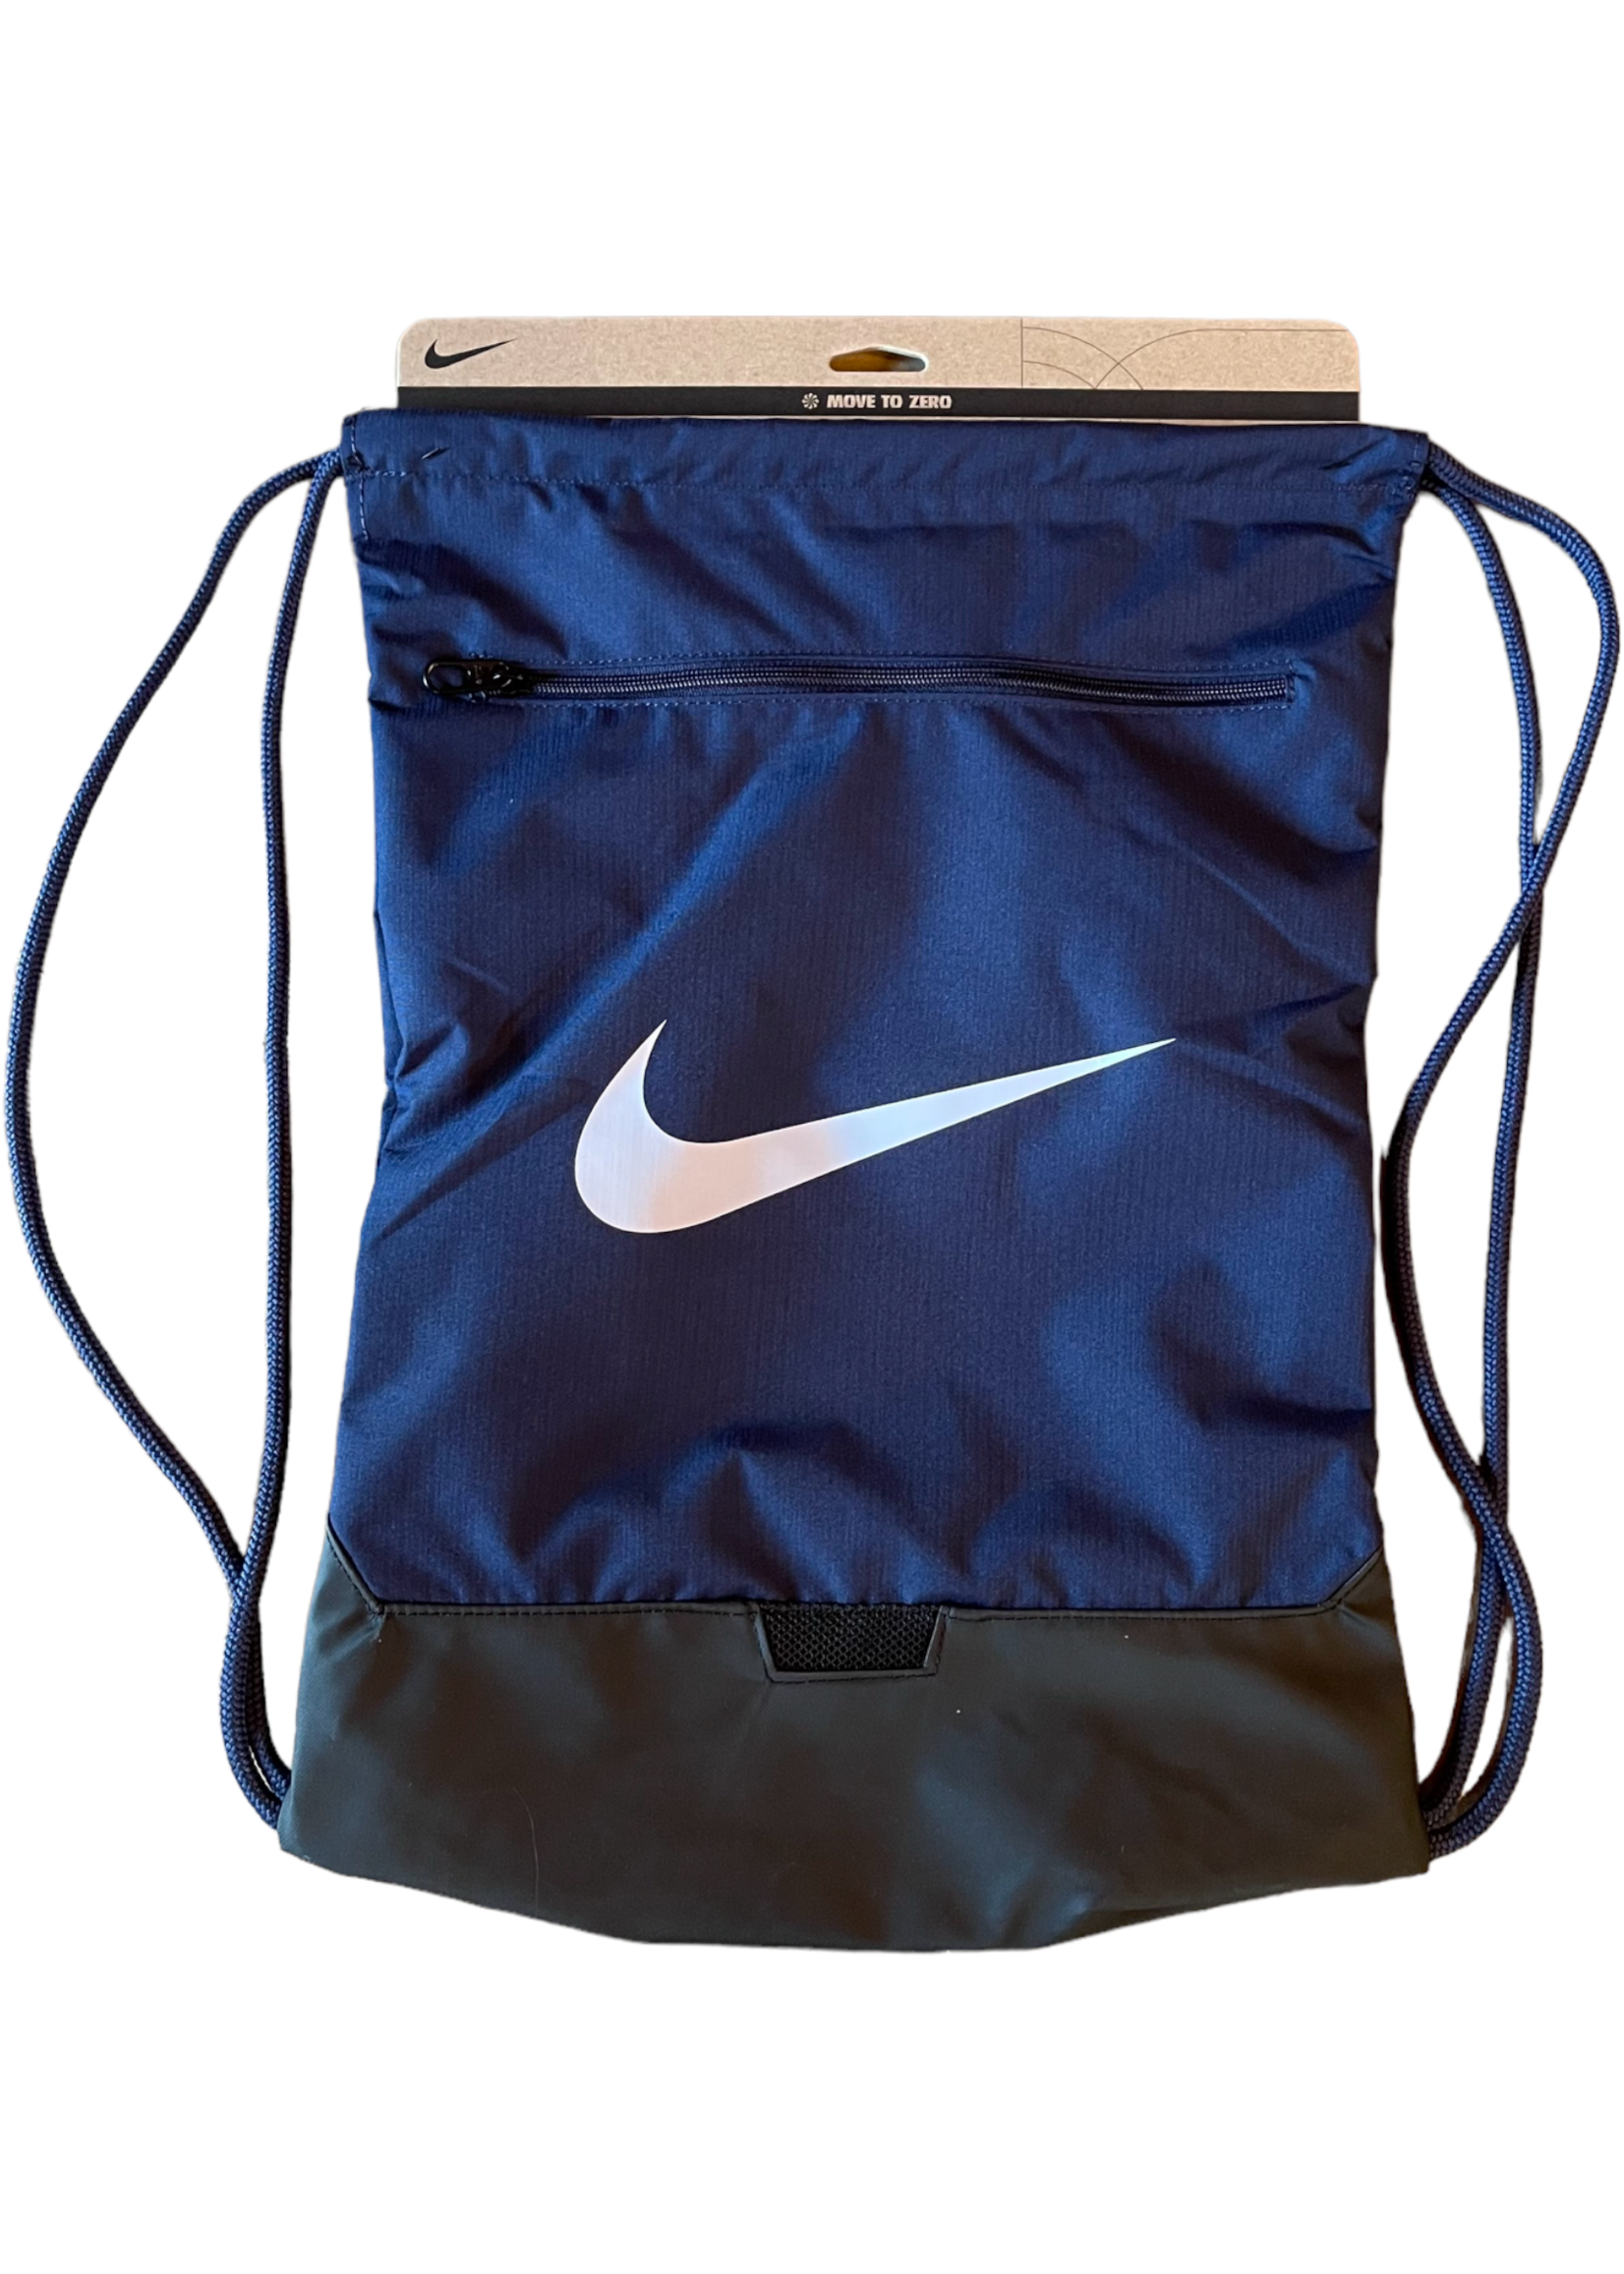 Nike Chargers Gymsack